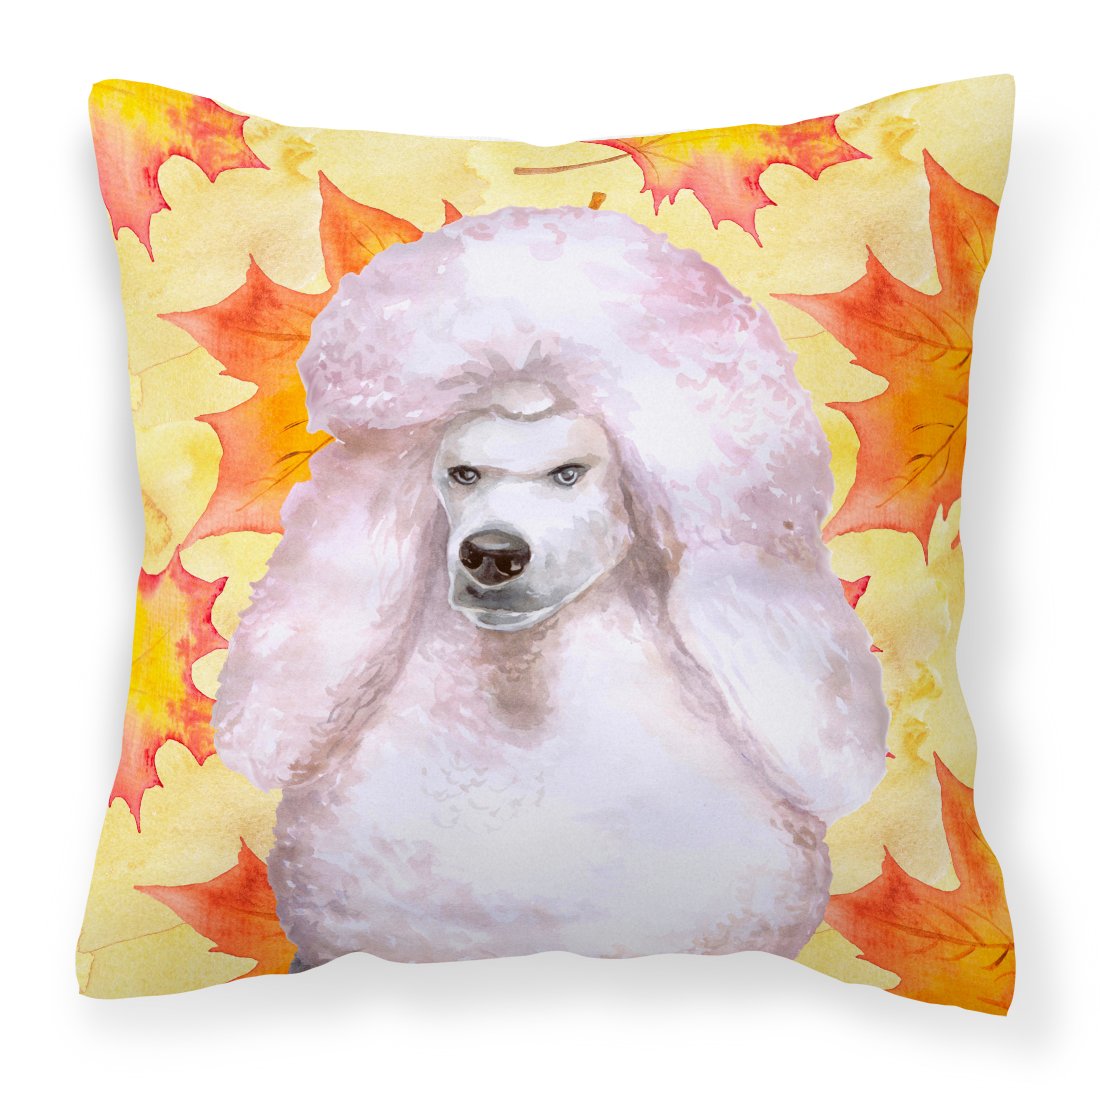 White Standard Poodle Fall Fabric Decorative Pillow BB9978PW1818 by Caroline's Treasures